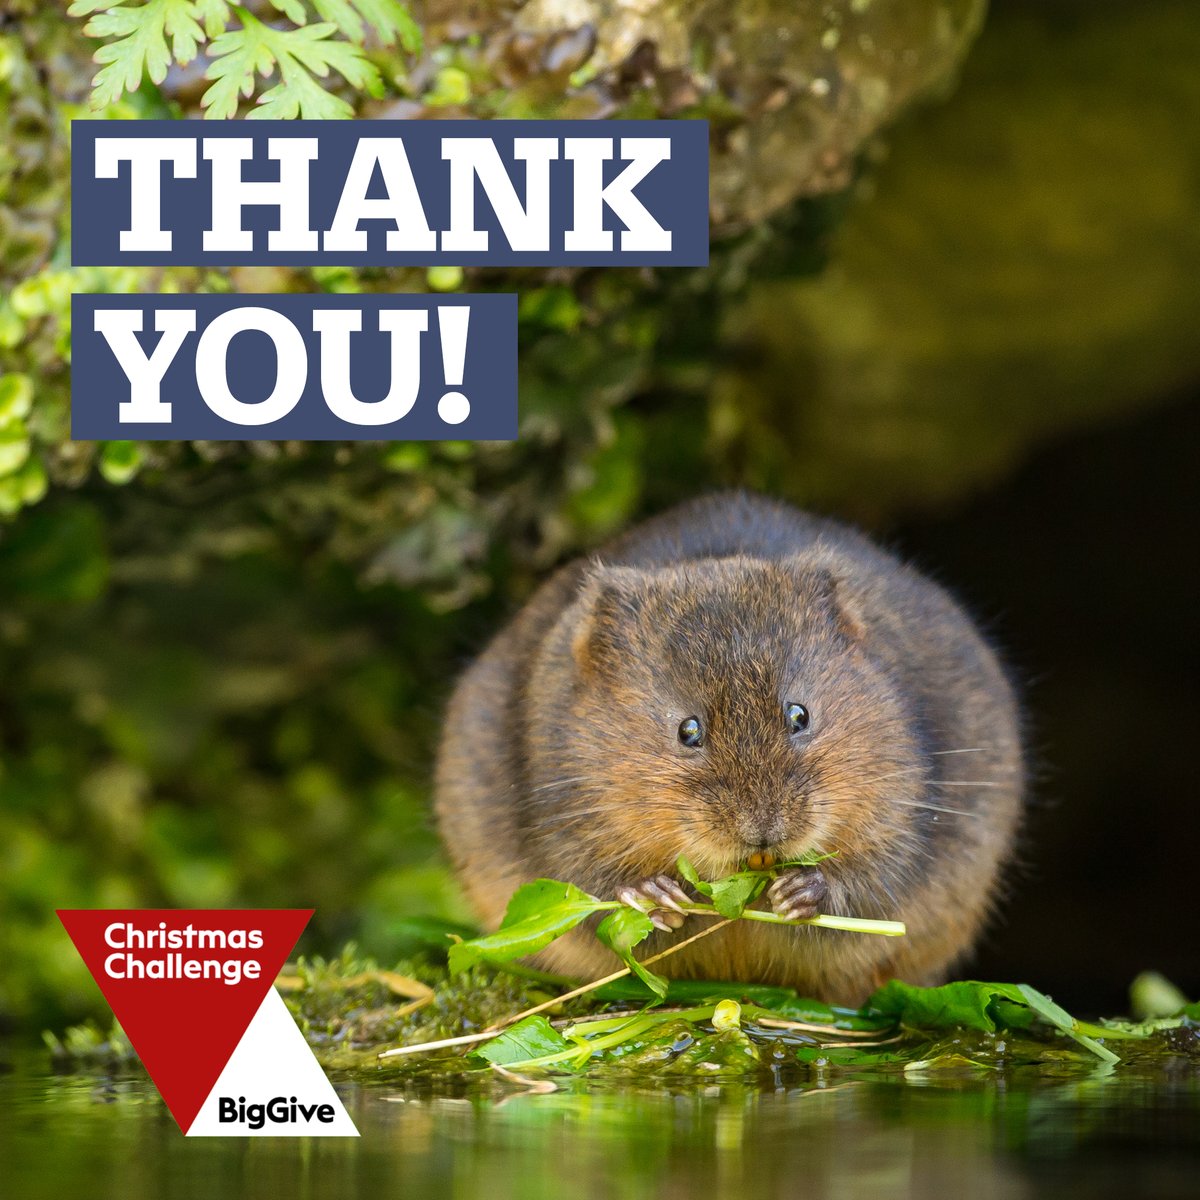 Thank you so much to everyone who helped us reach – and exceed! – our £12,000 goal for water vole conservation through the @BigGive's #ChristmasChallenge! 🎉💚 If you want to give to our water vole appeal, you still can! 👉 ptes.org/ways-to-give/w… 📸 Mark Bridger